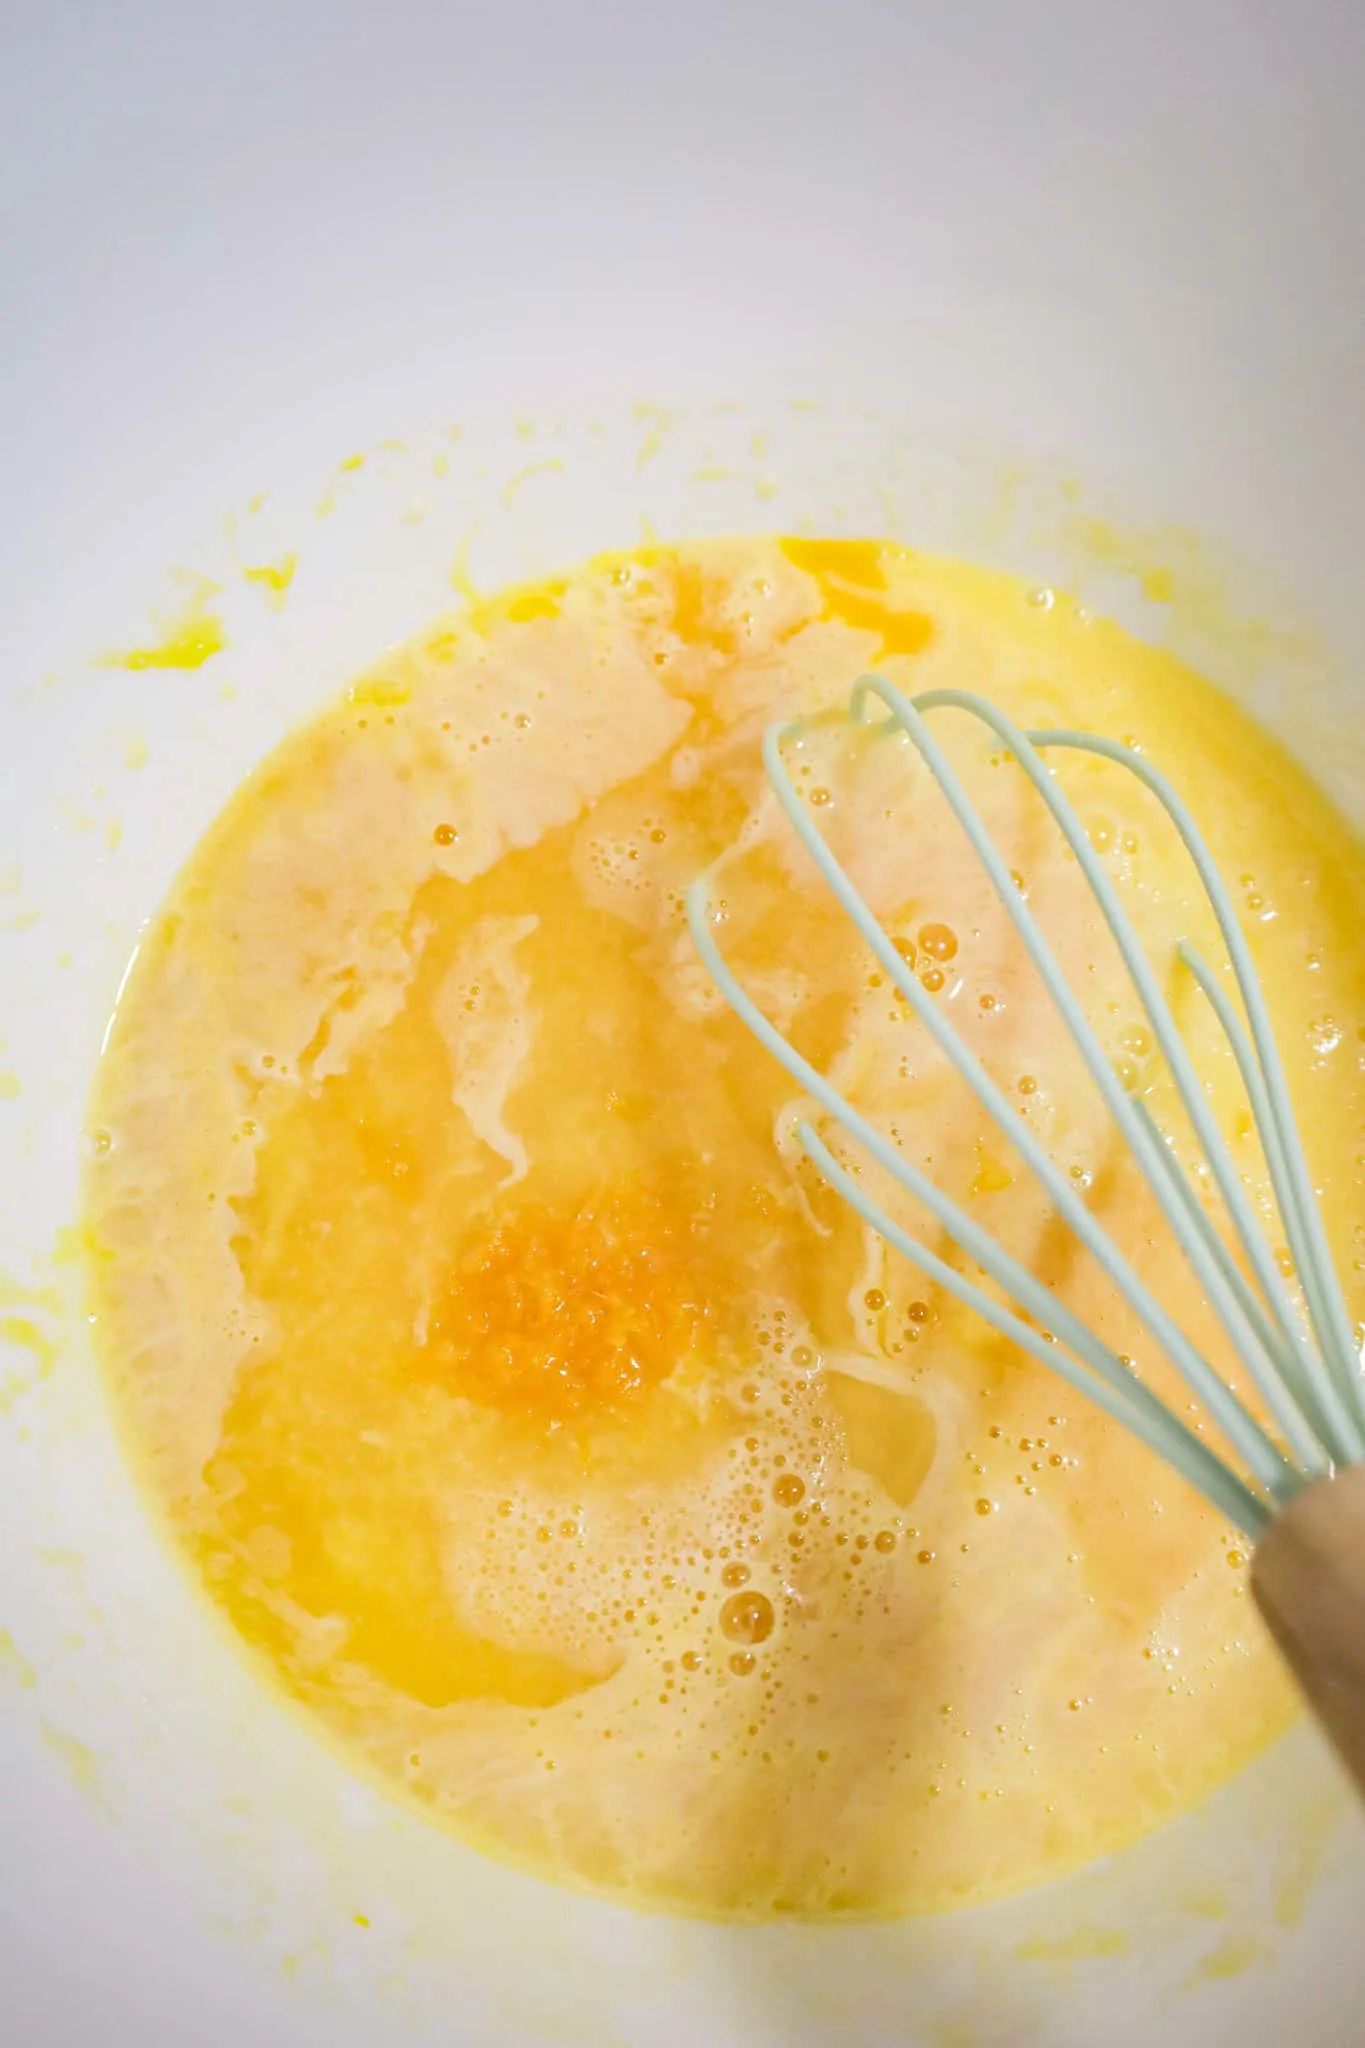 orange juice concentrate, orange zest, lime juice, egg yolks and sweetened condensed milk in a mixing bowl